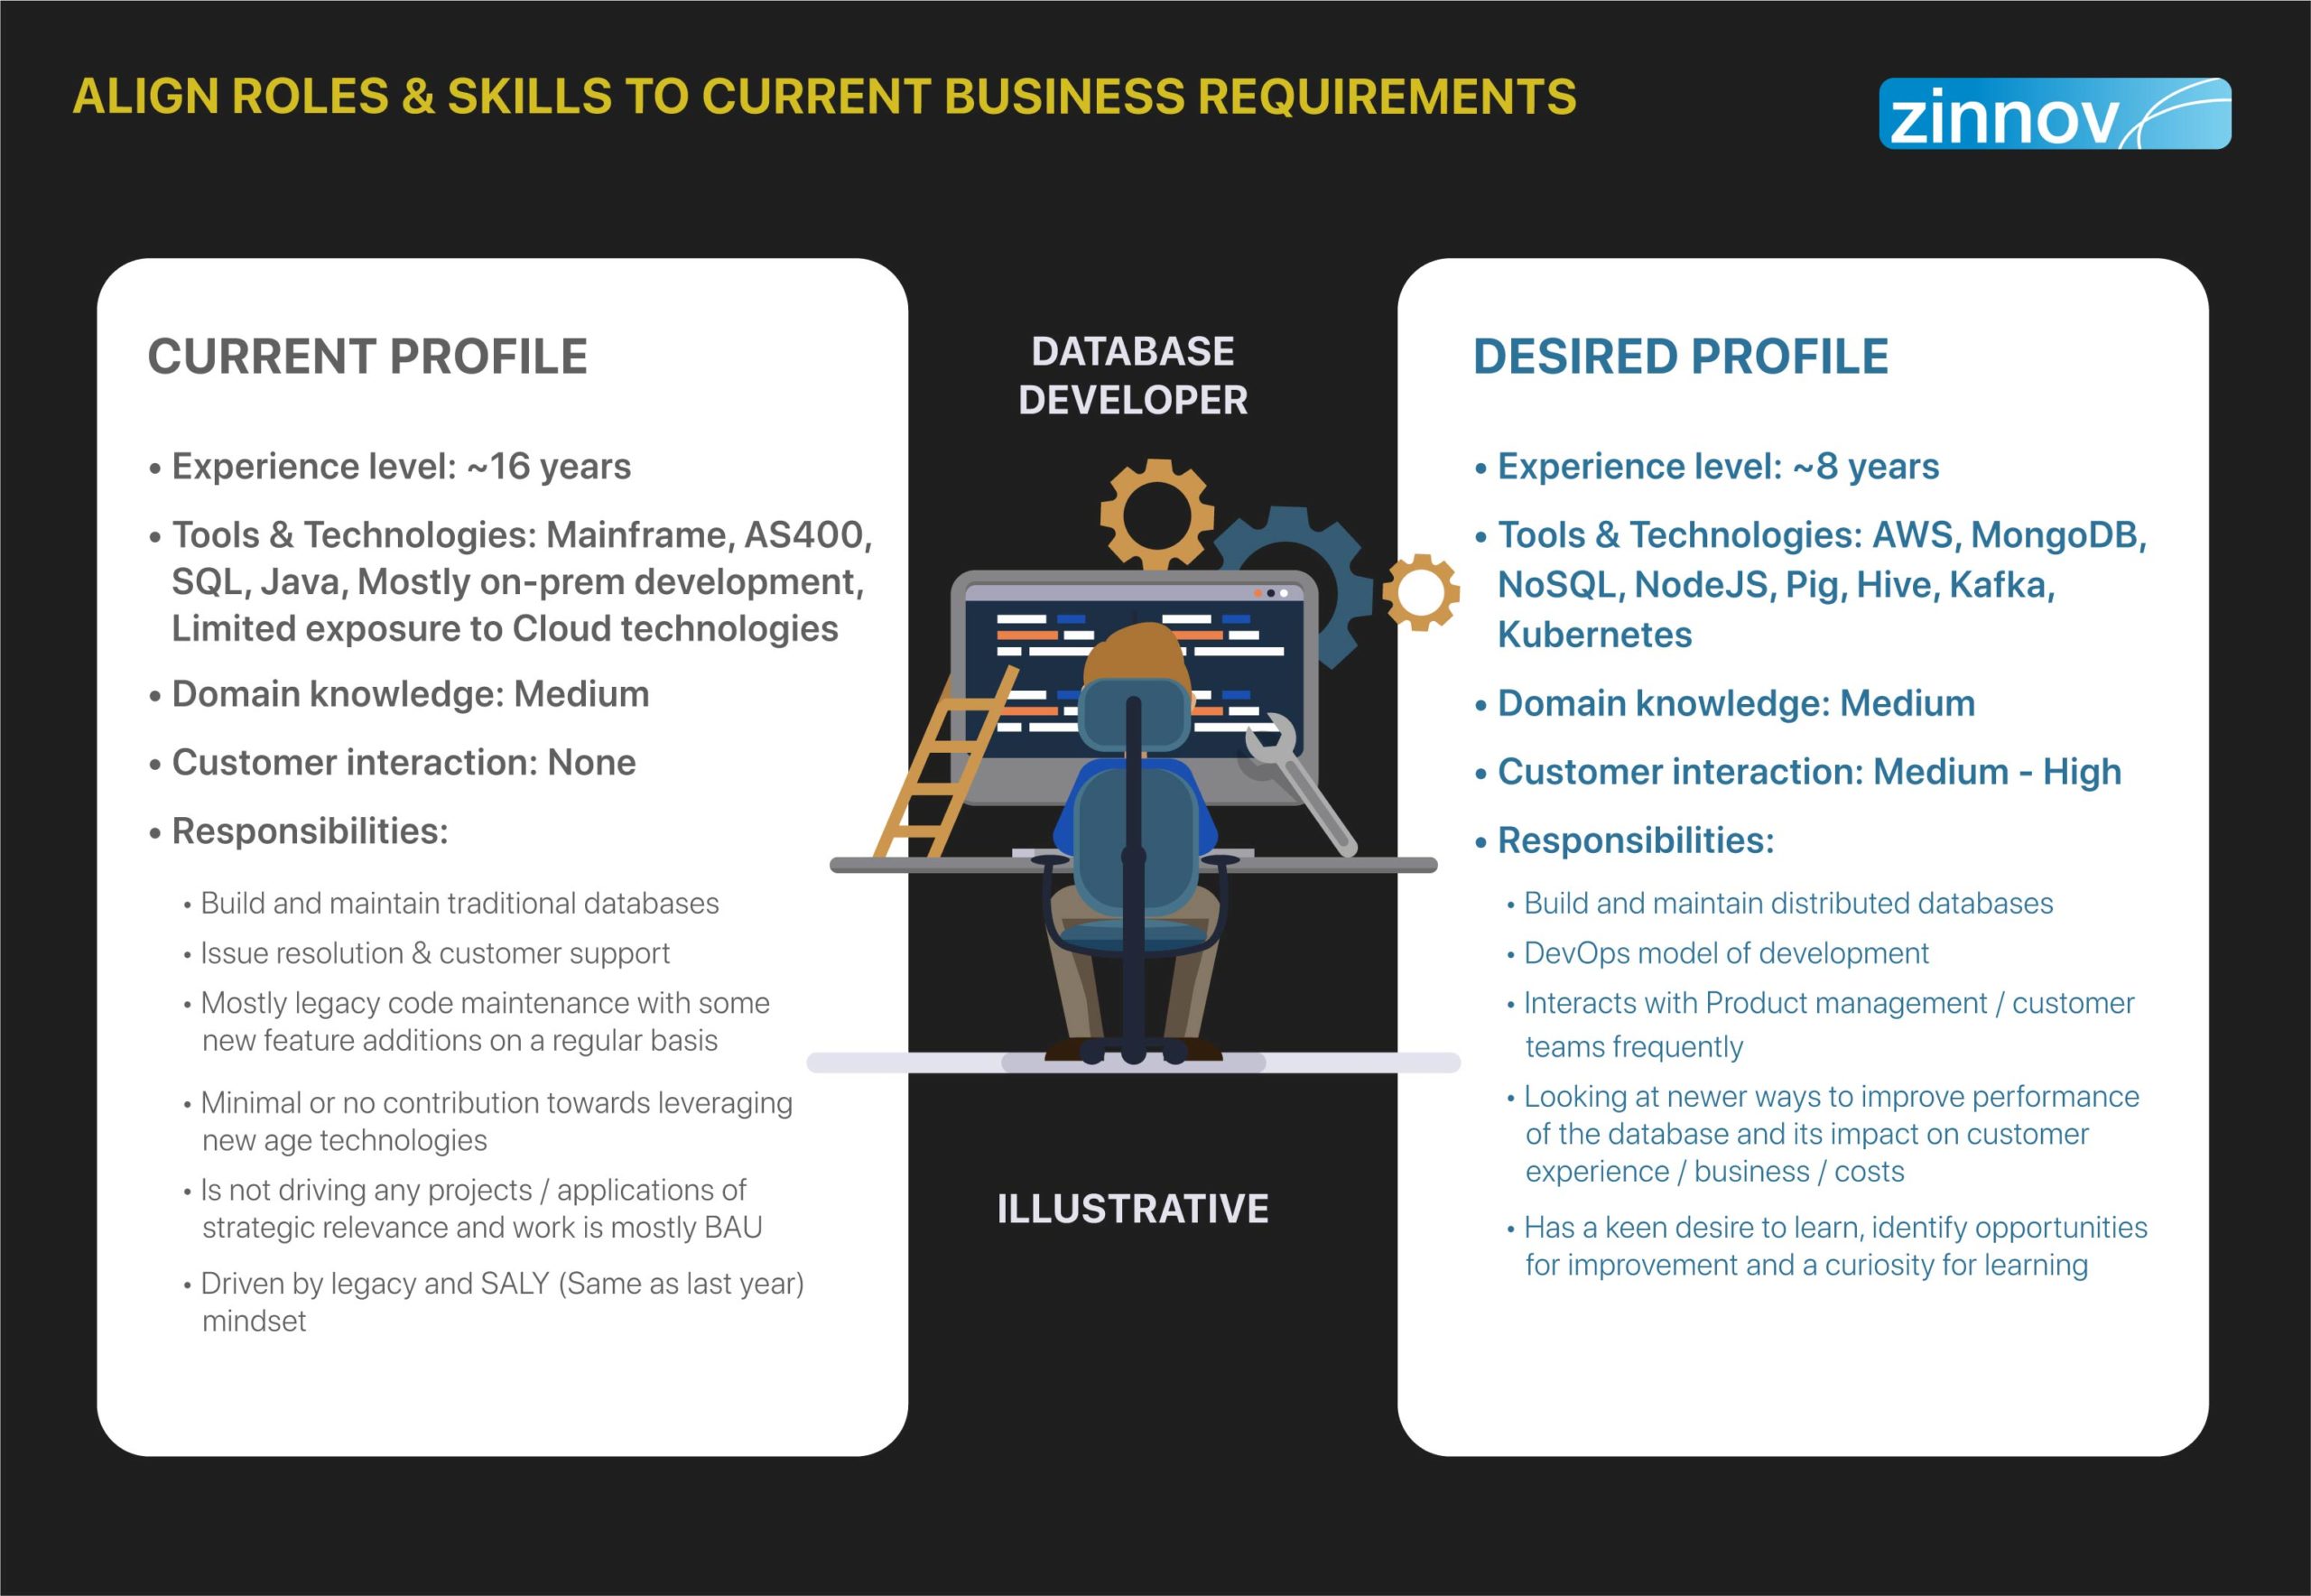 Align roles & skills to current business requirement